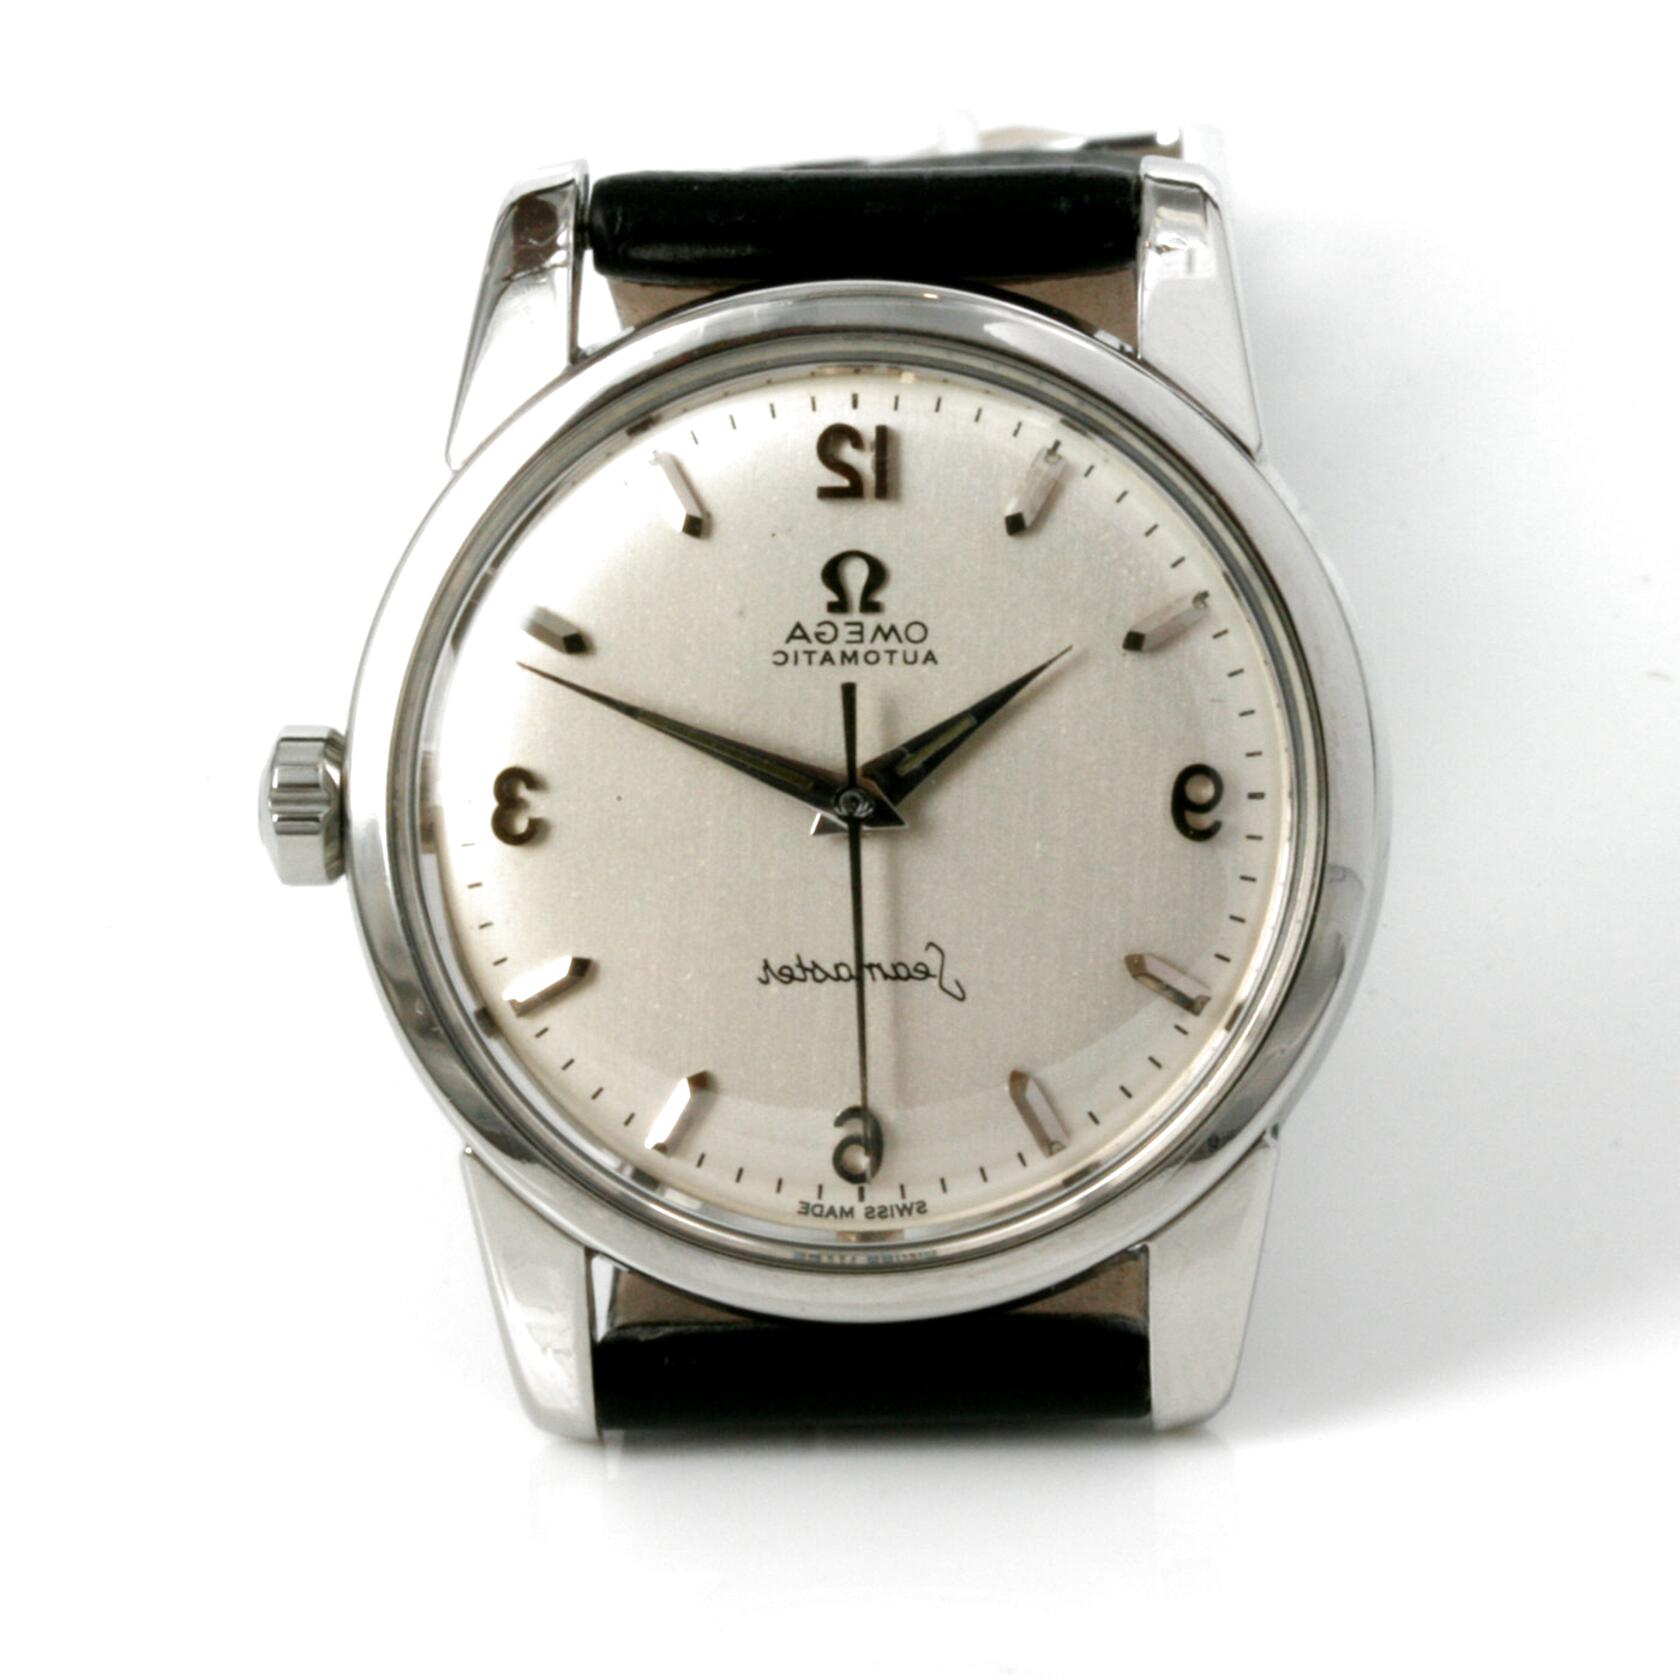 Classic Omega Watches for sale in UK 68 used Classic Omega Watches